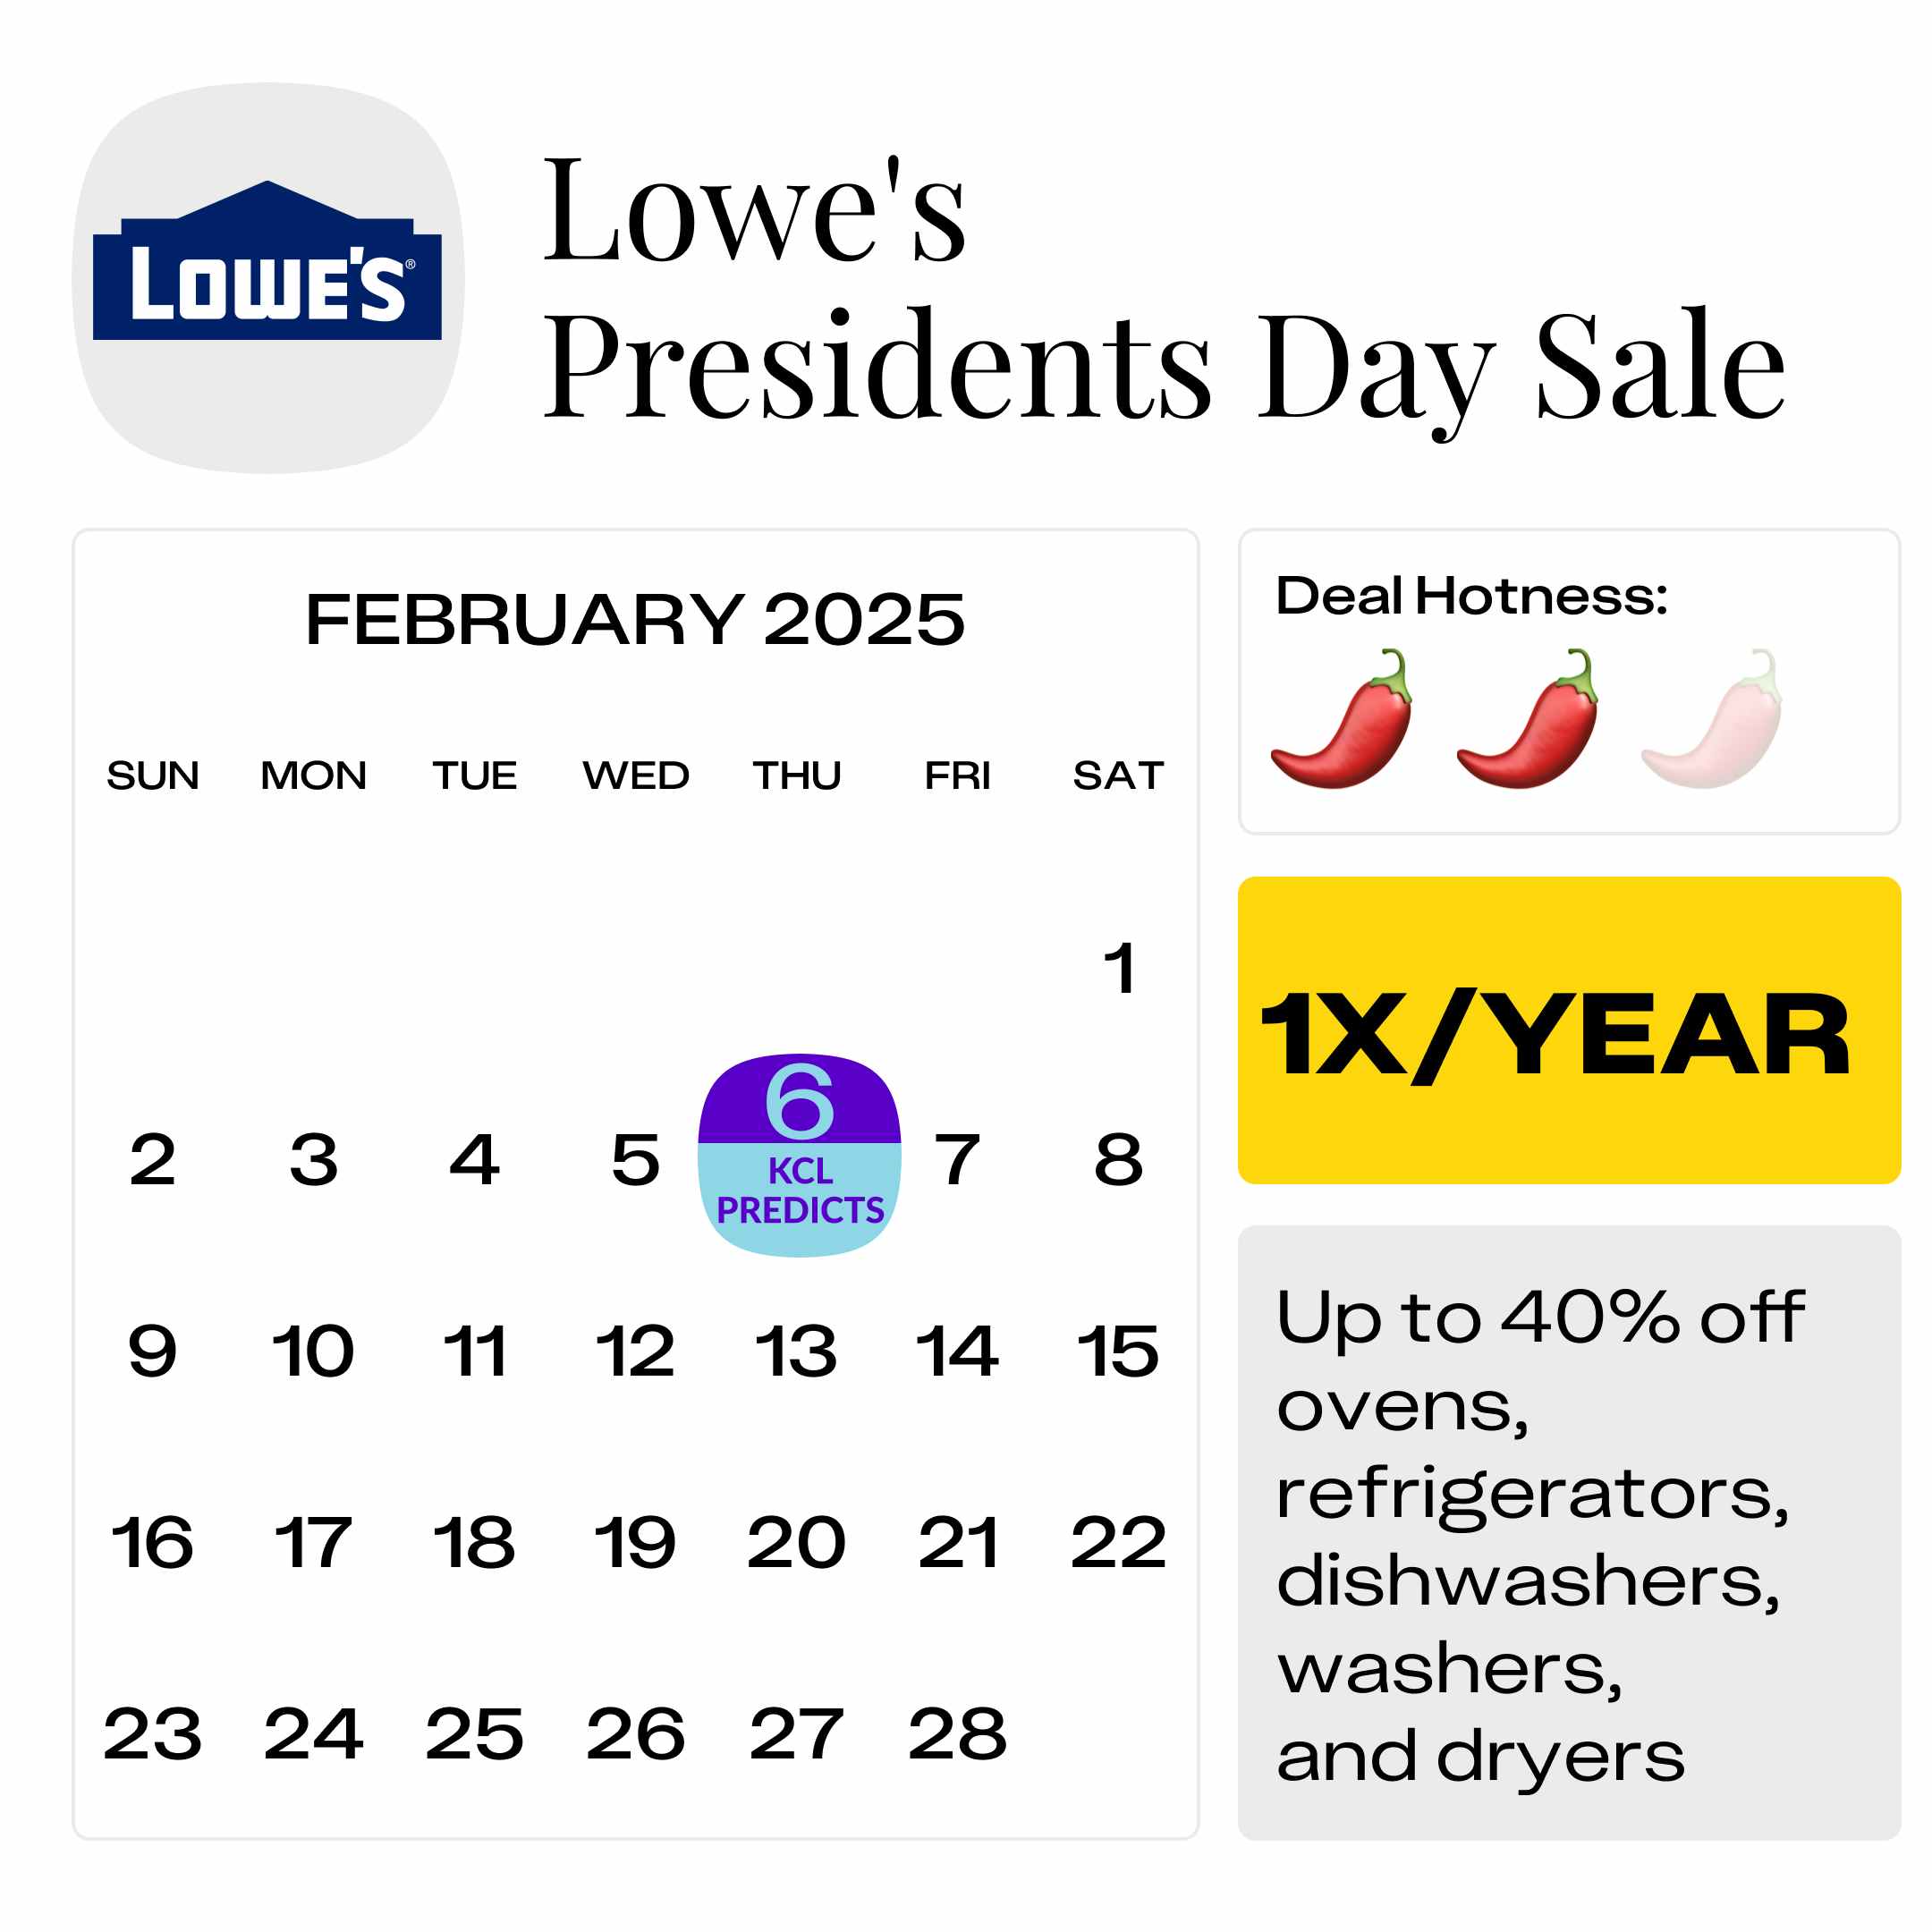 Lowes-Presidents-Day-Sale